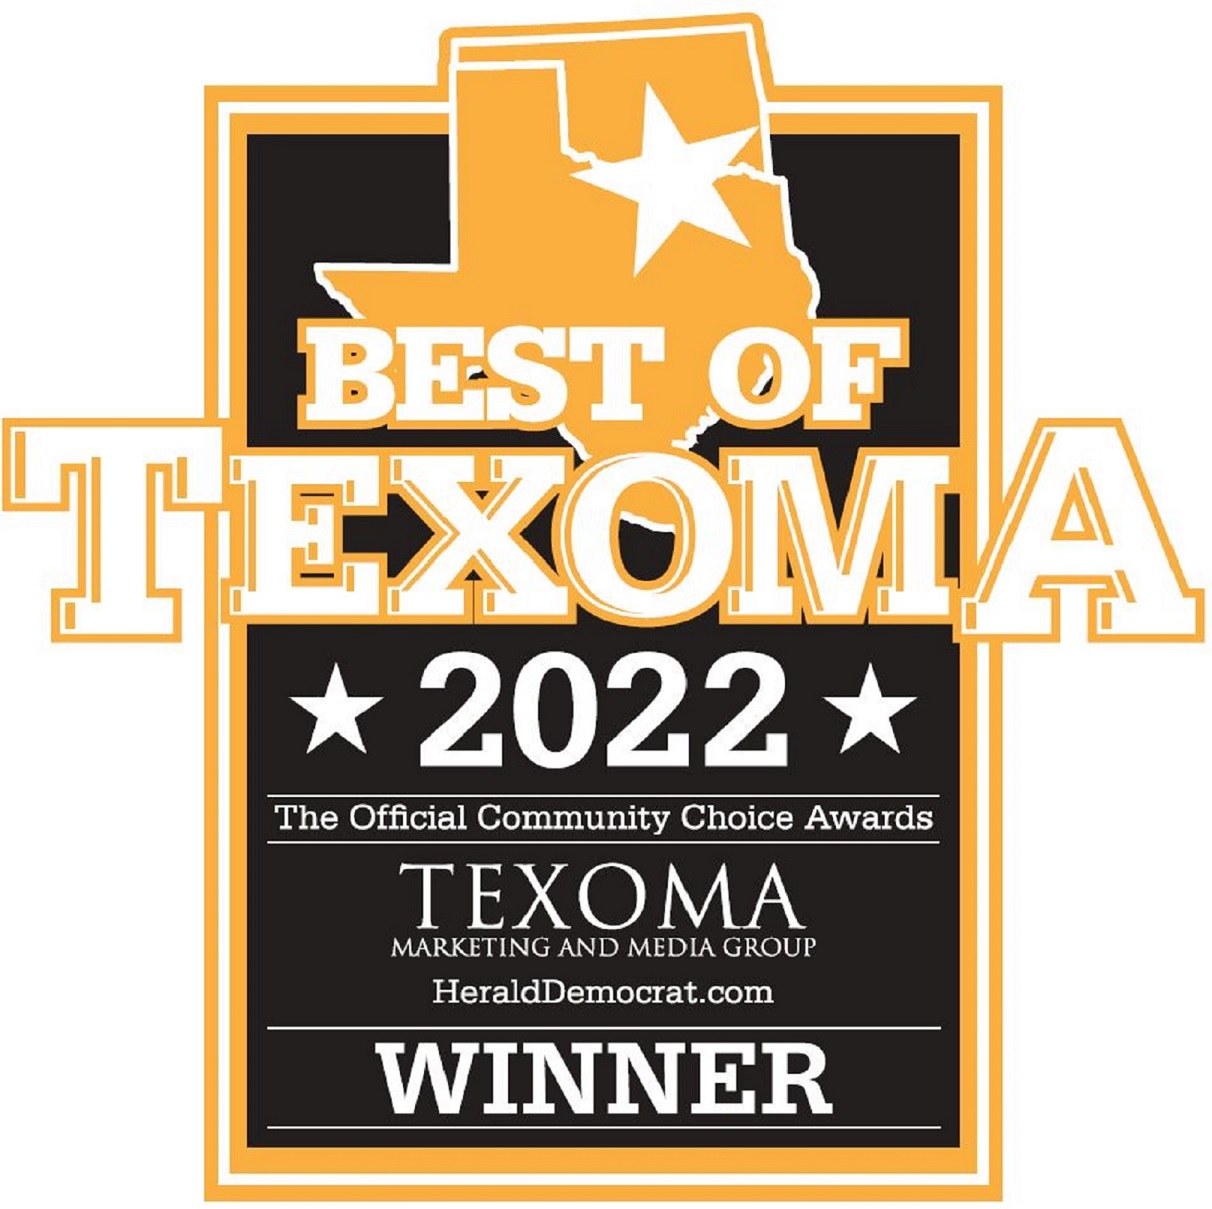 Voted Best of Texoma 2022